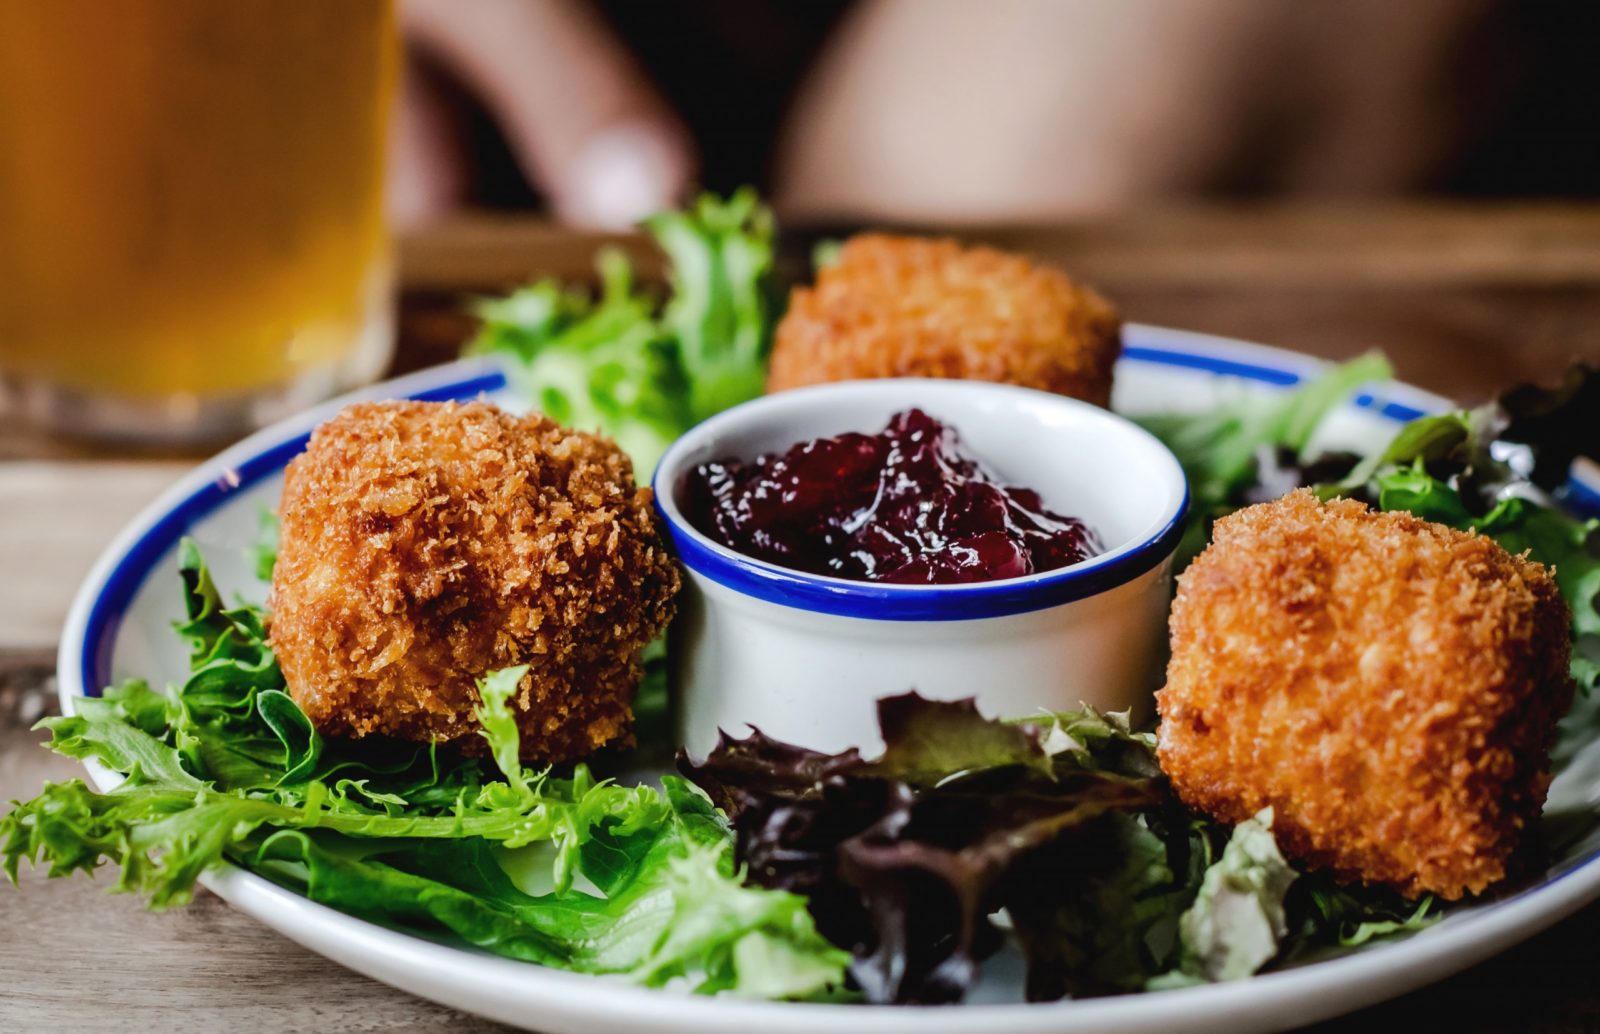 Panko breadcrumbed brie, served with cranberry sauce